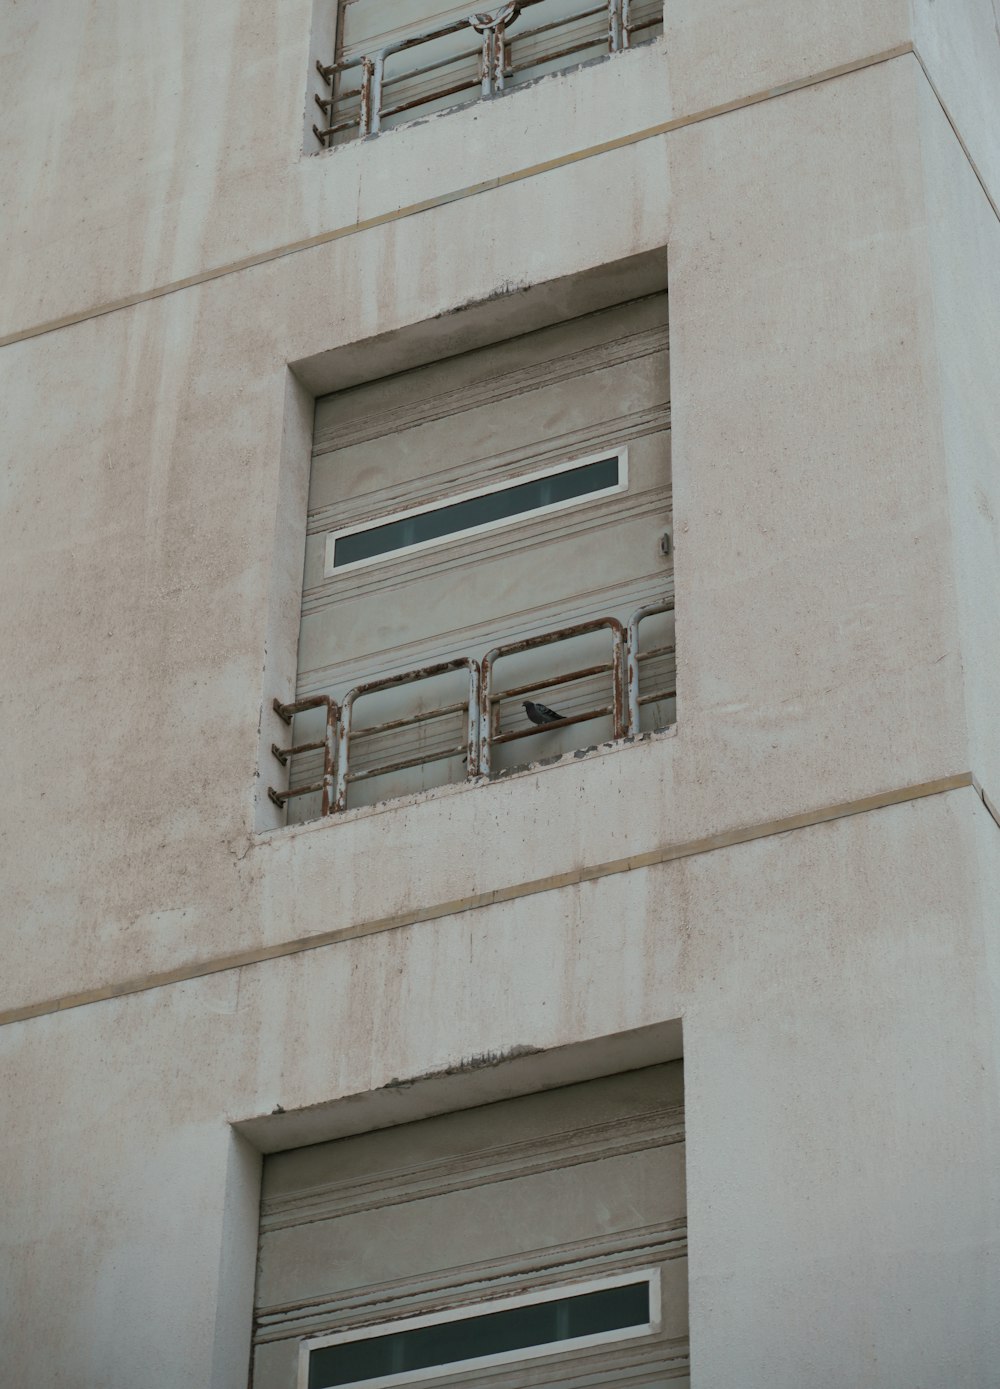 a tall building with two windows and a bird sitting in the window